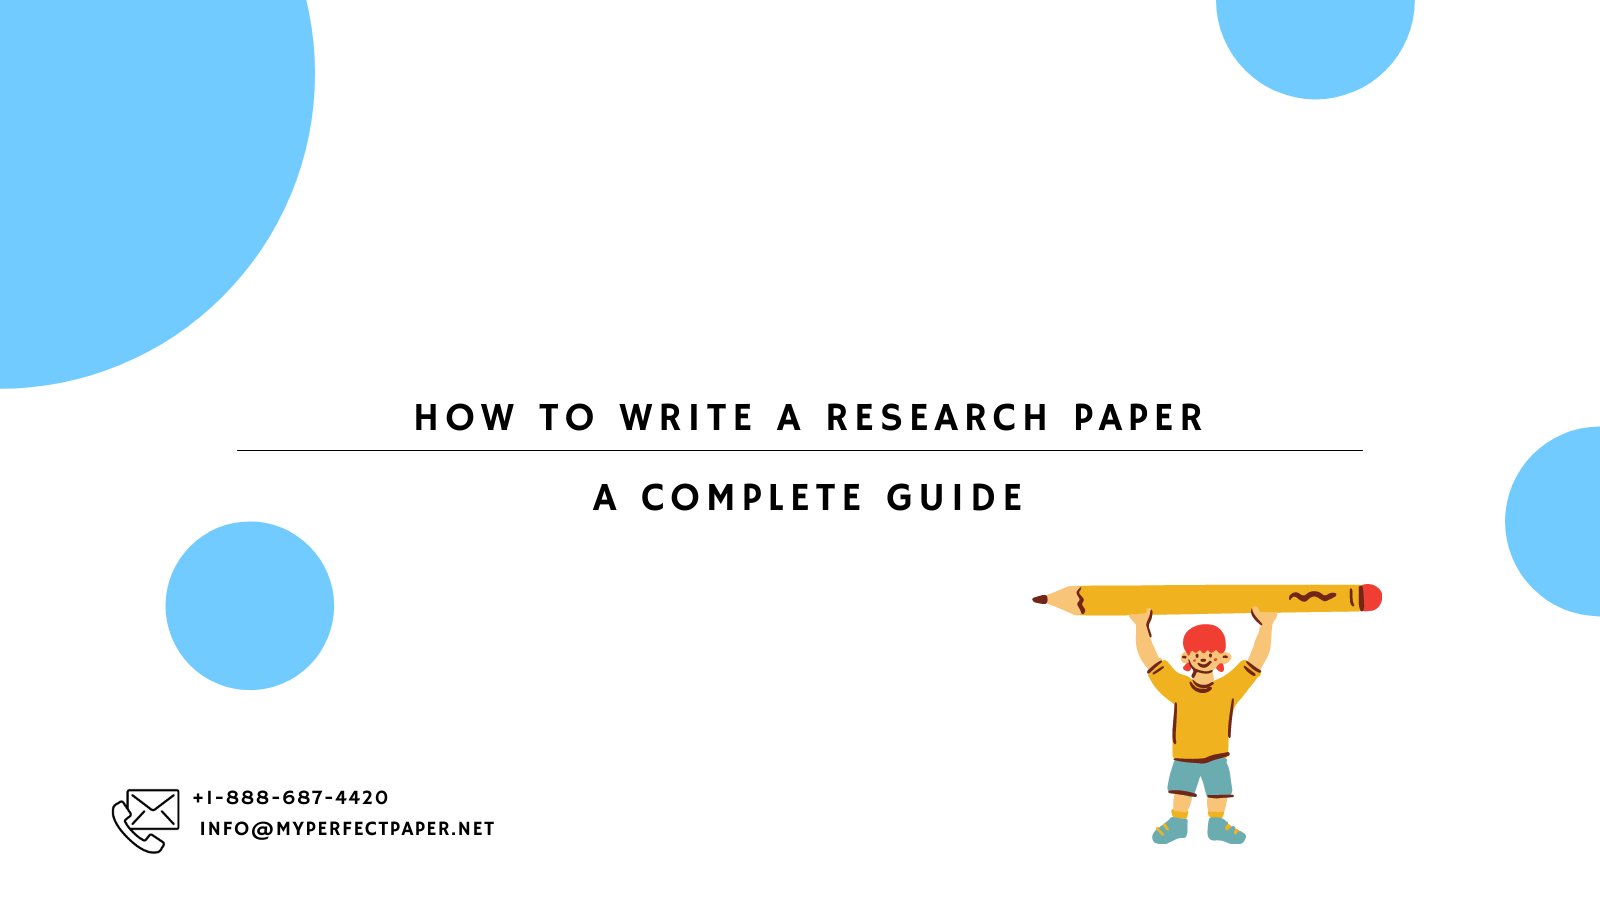 Essay Writer on Twitter: "To make a research paper look